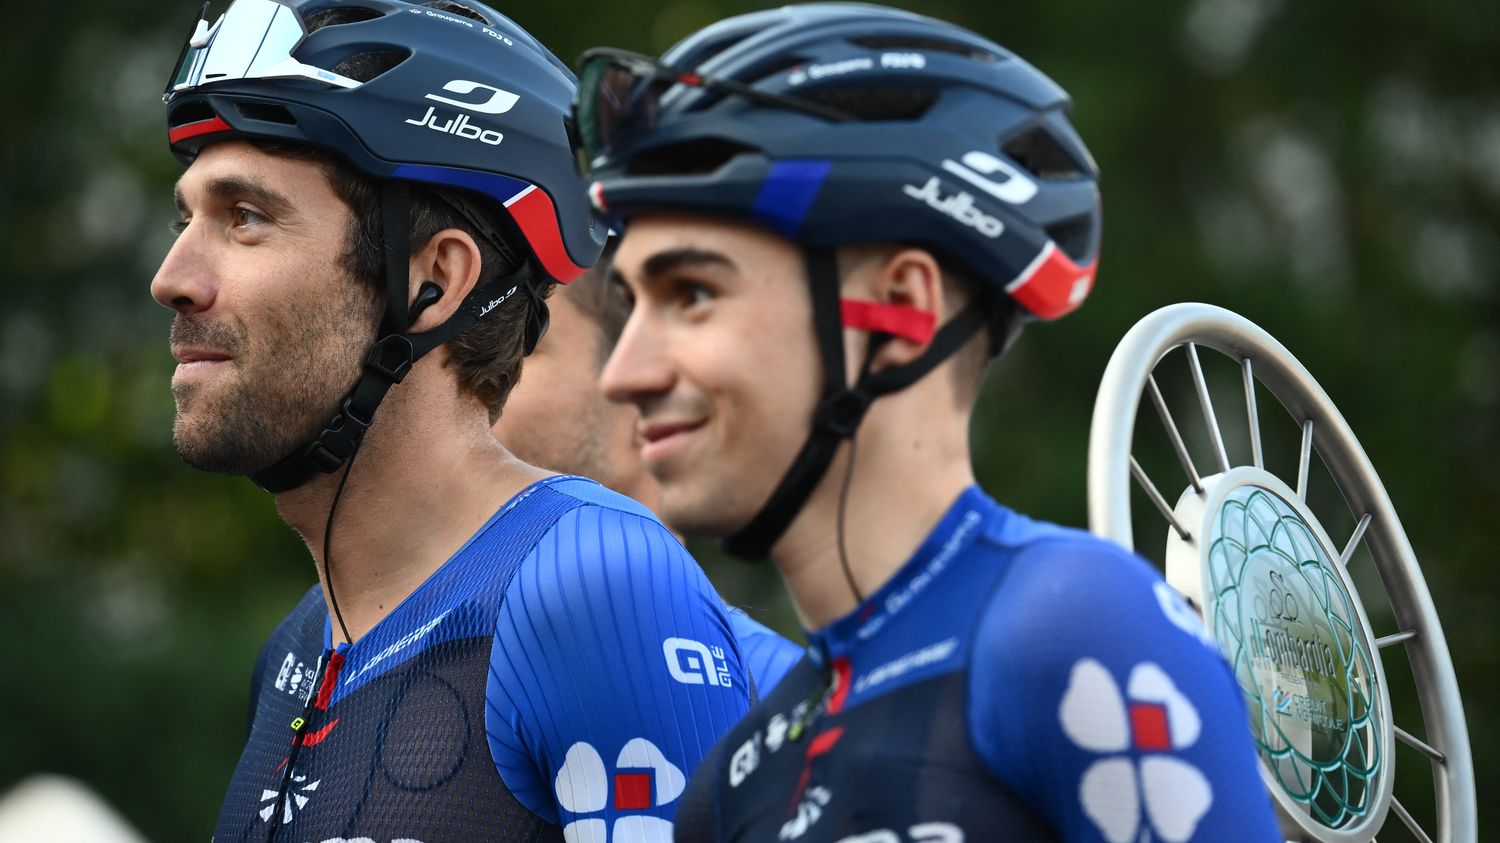 Cycling: youth and the collective... Groupama-FDJ changes gears and begins the post-Thibaut Pinot era